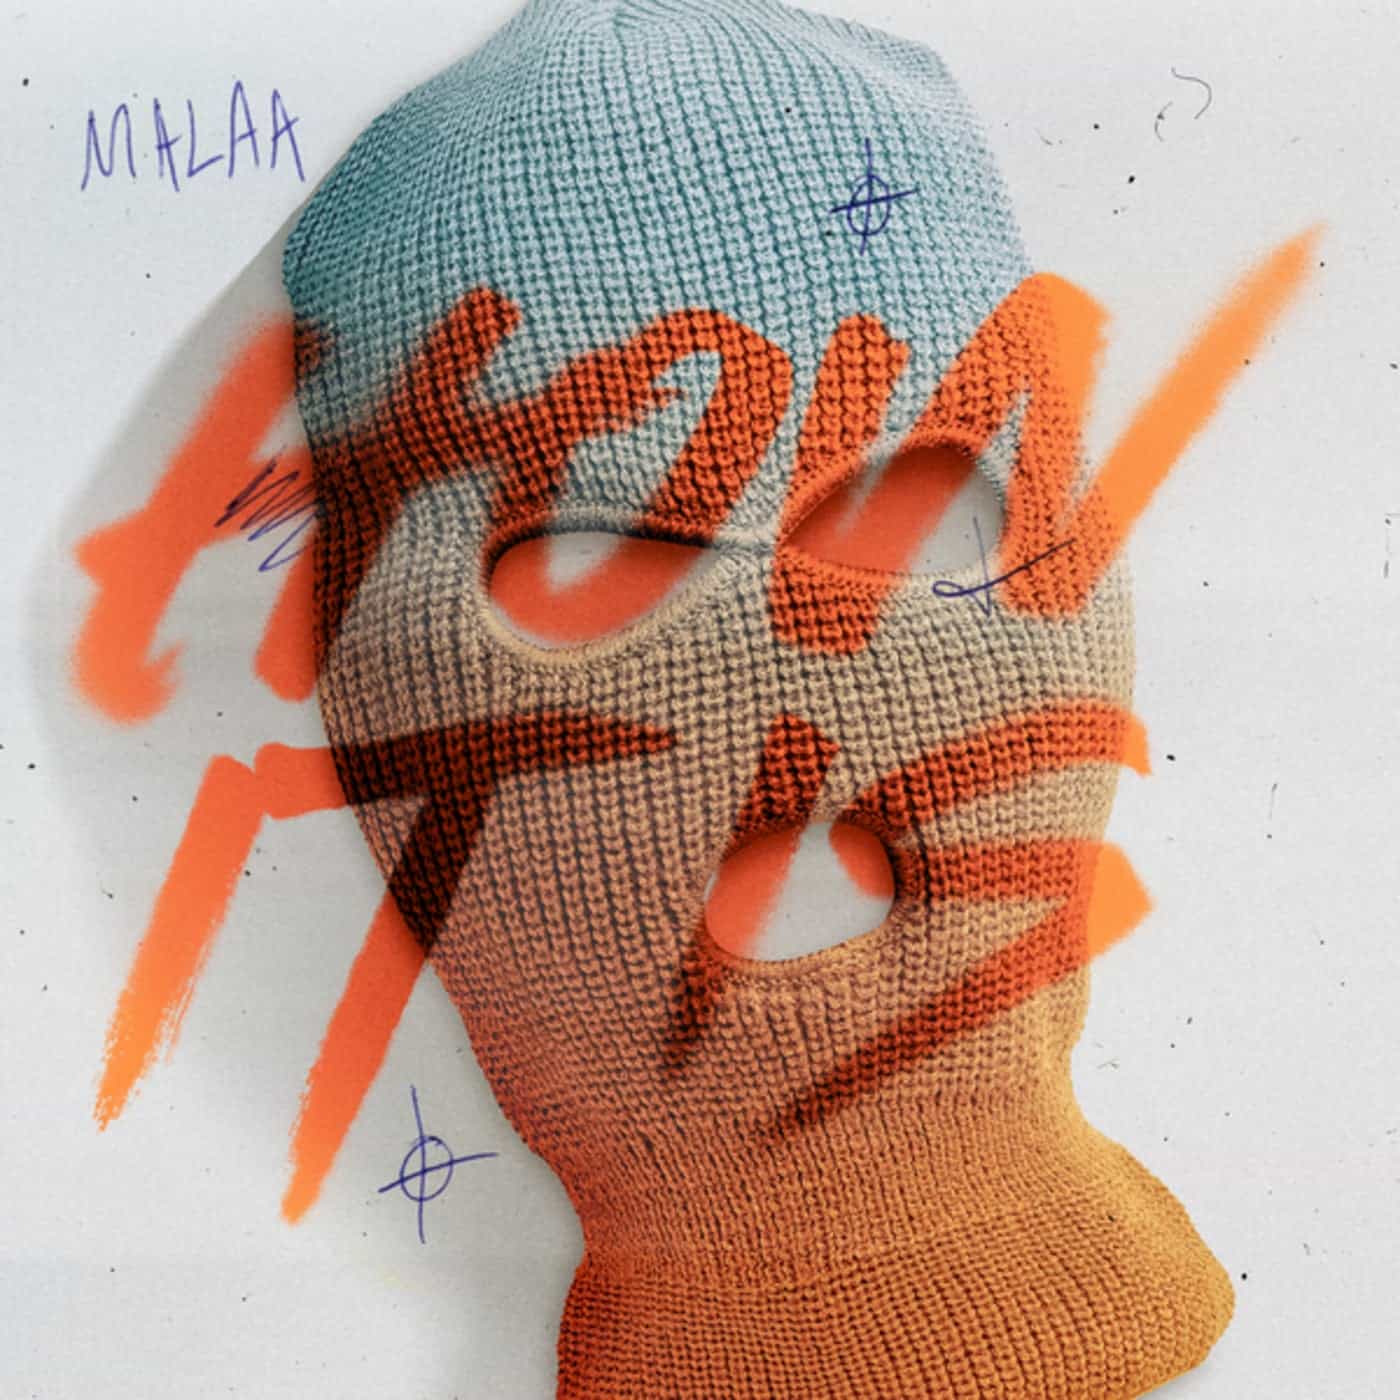 Download Malaa - How it is